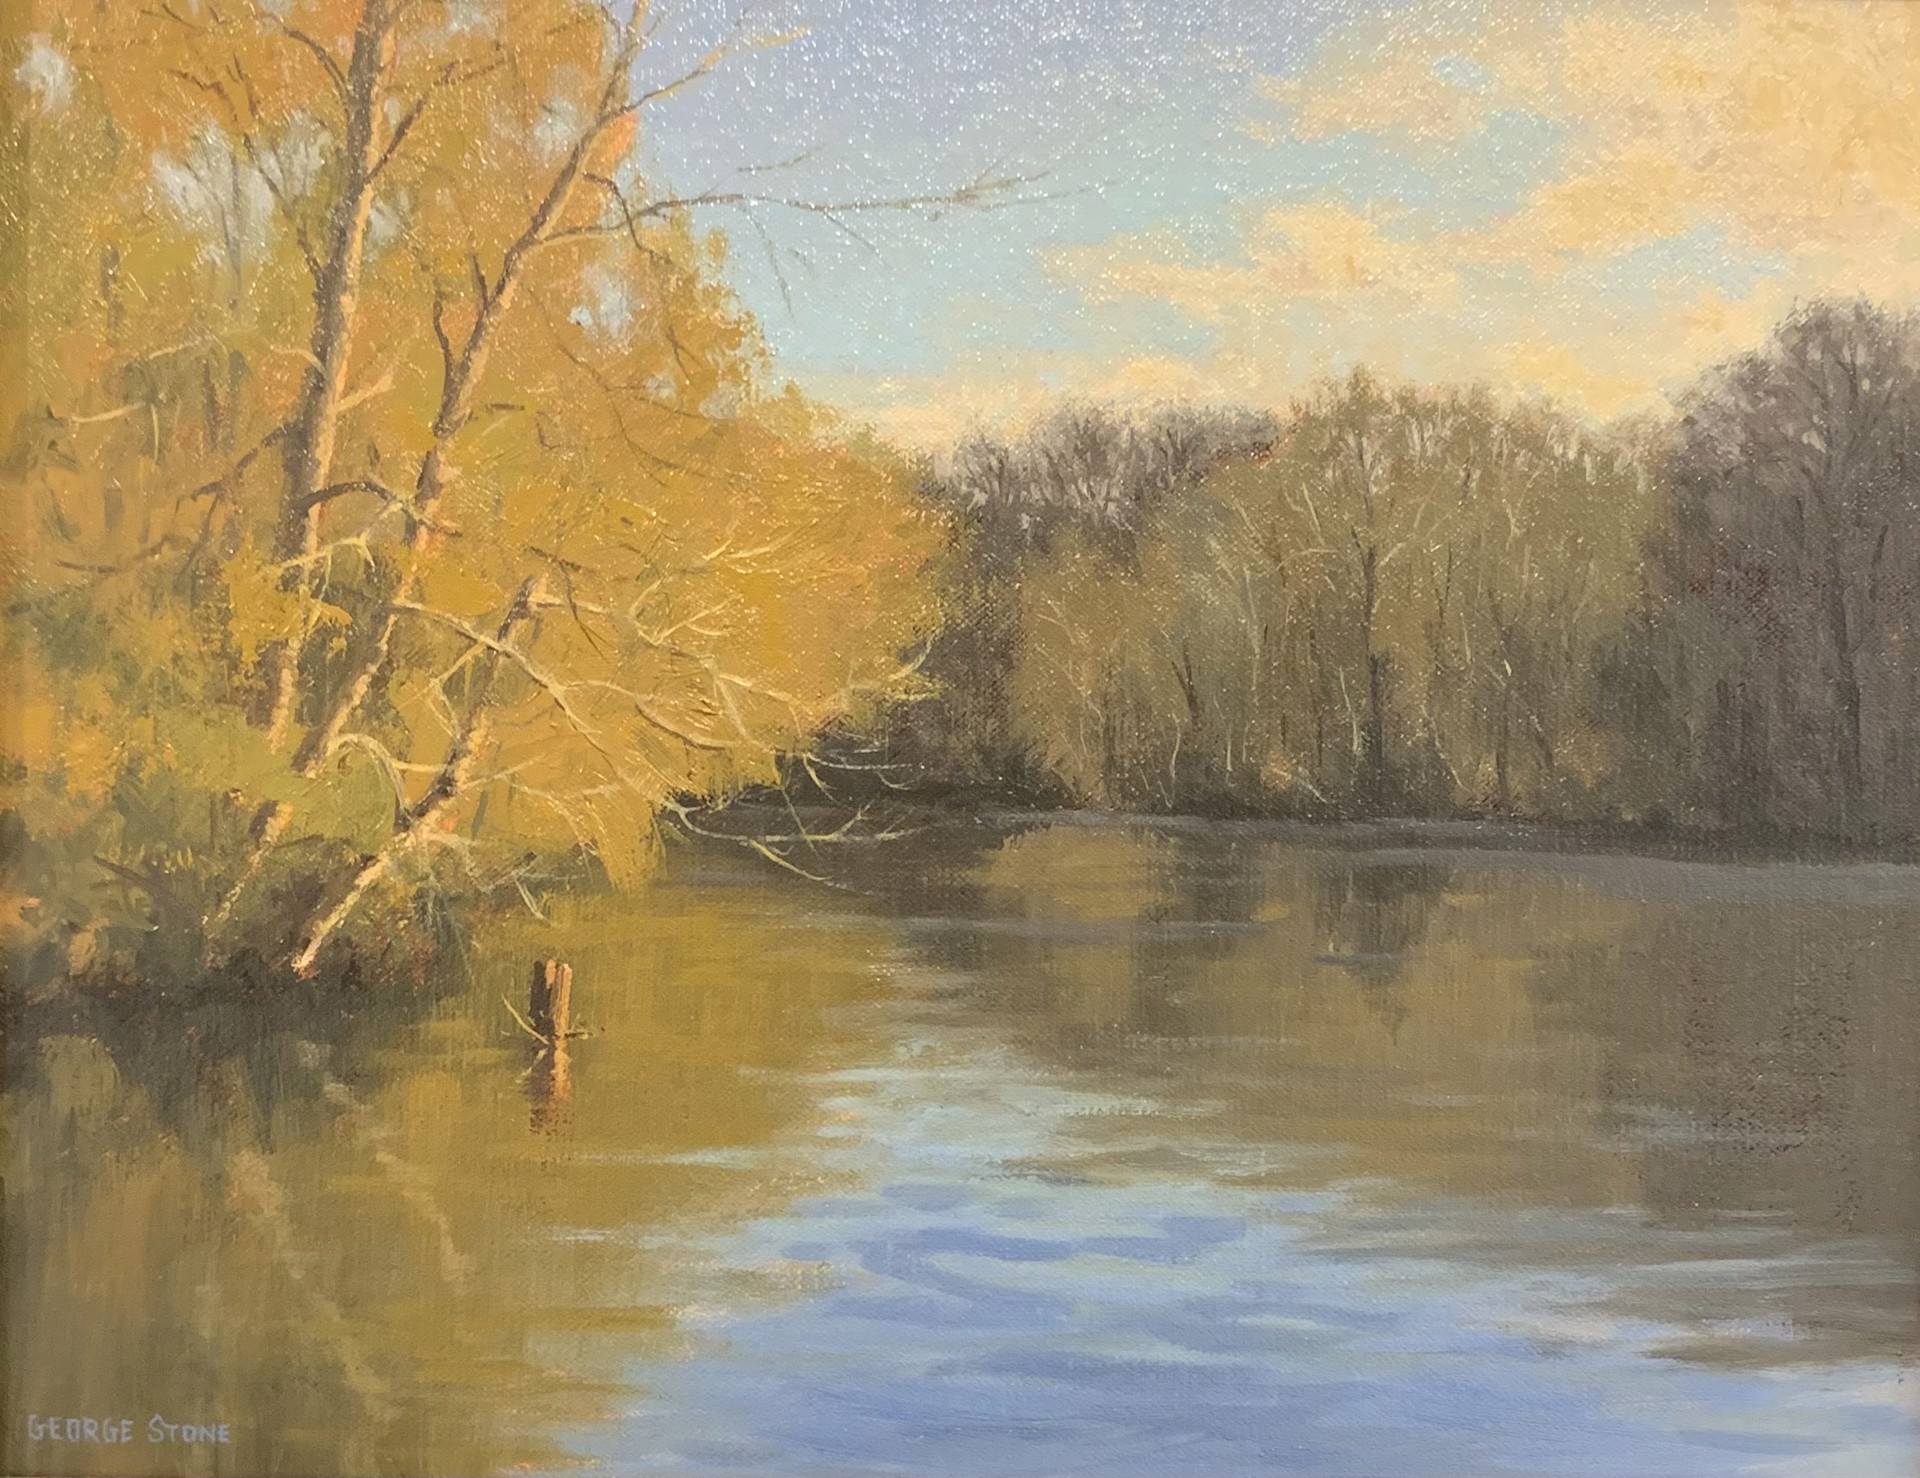 Winter Afternoon, Saluda River by George Stone